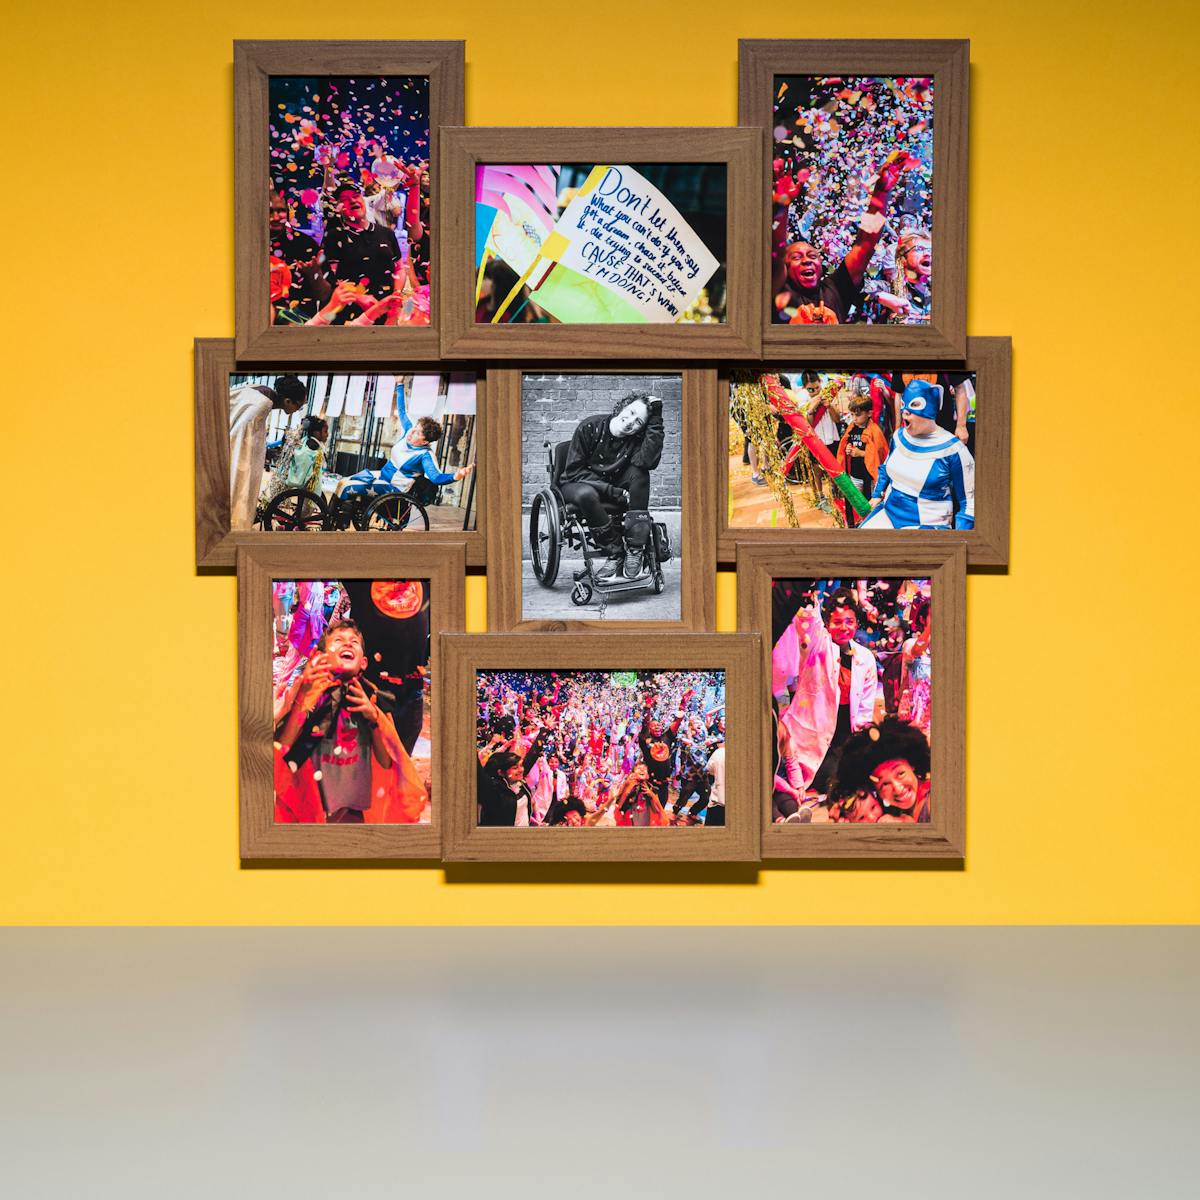 Photograph of a multi-frame photo frame containing nine photographs, one in black and white and eight in colour. The frame is hung on a yellow wall above a grey tabletop.